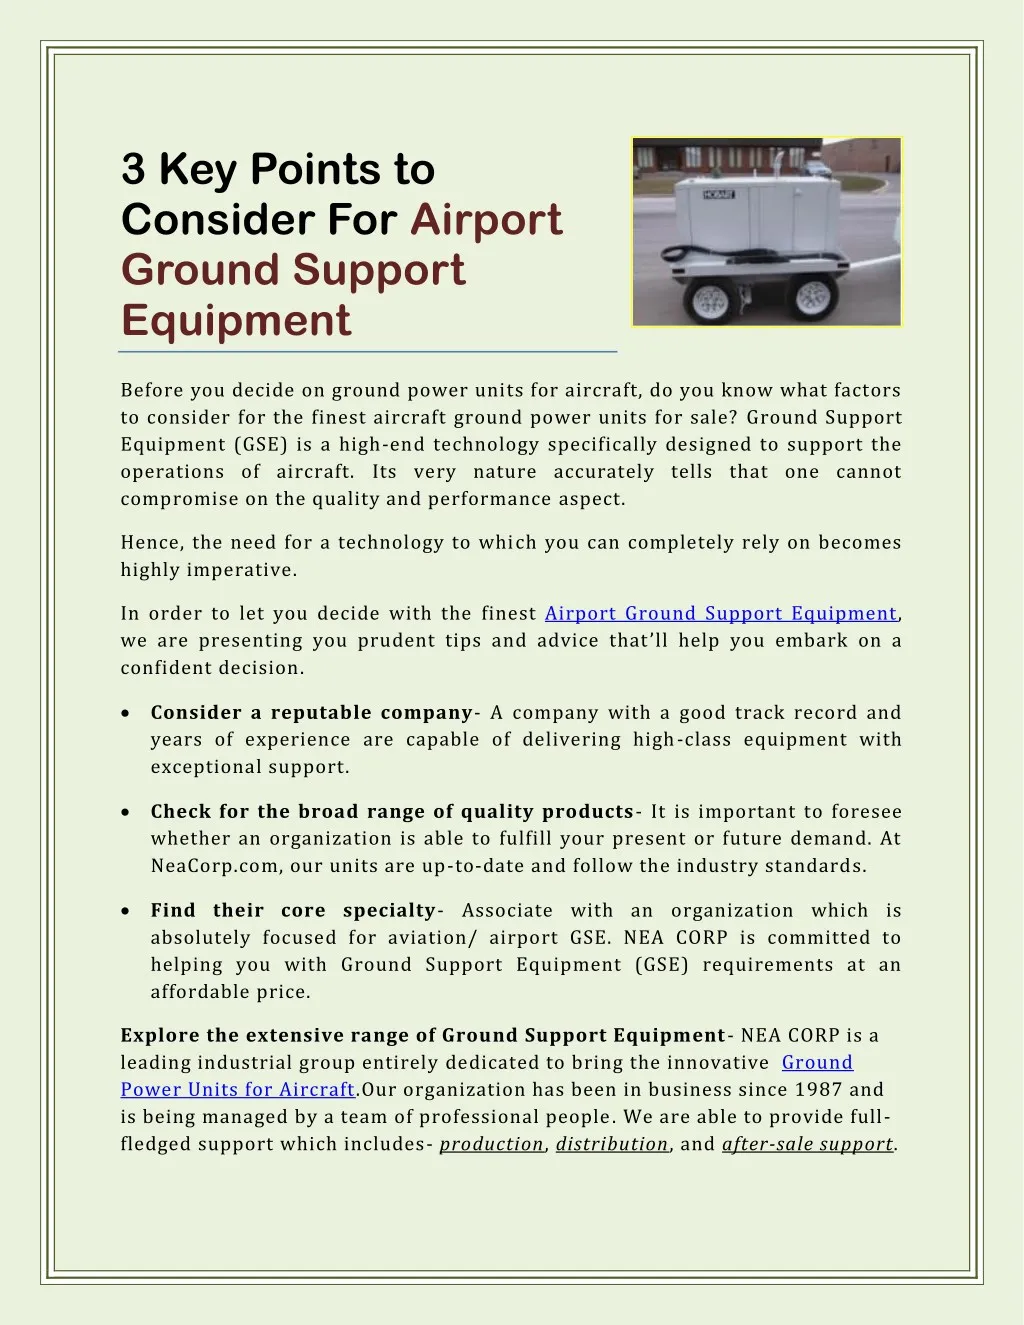 3 key points to consider for airport ground